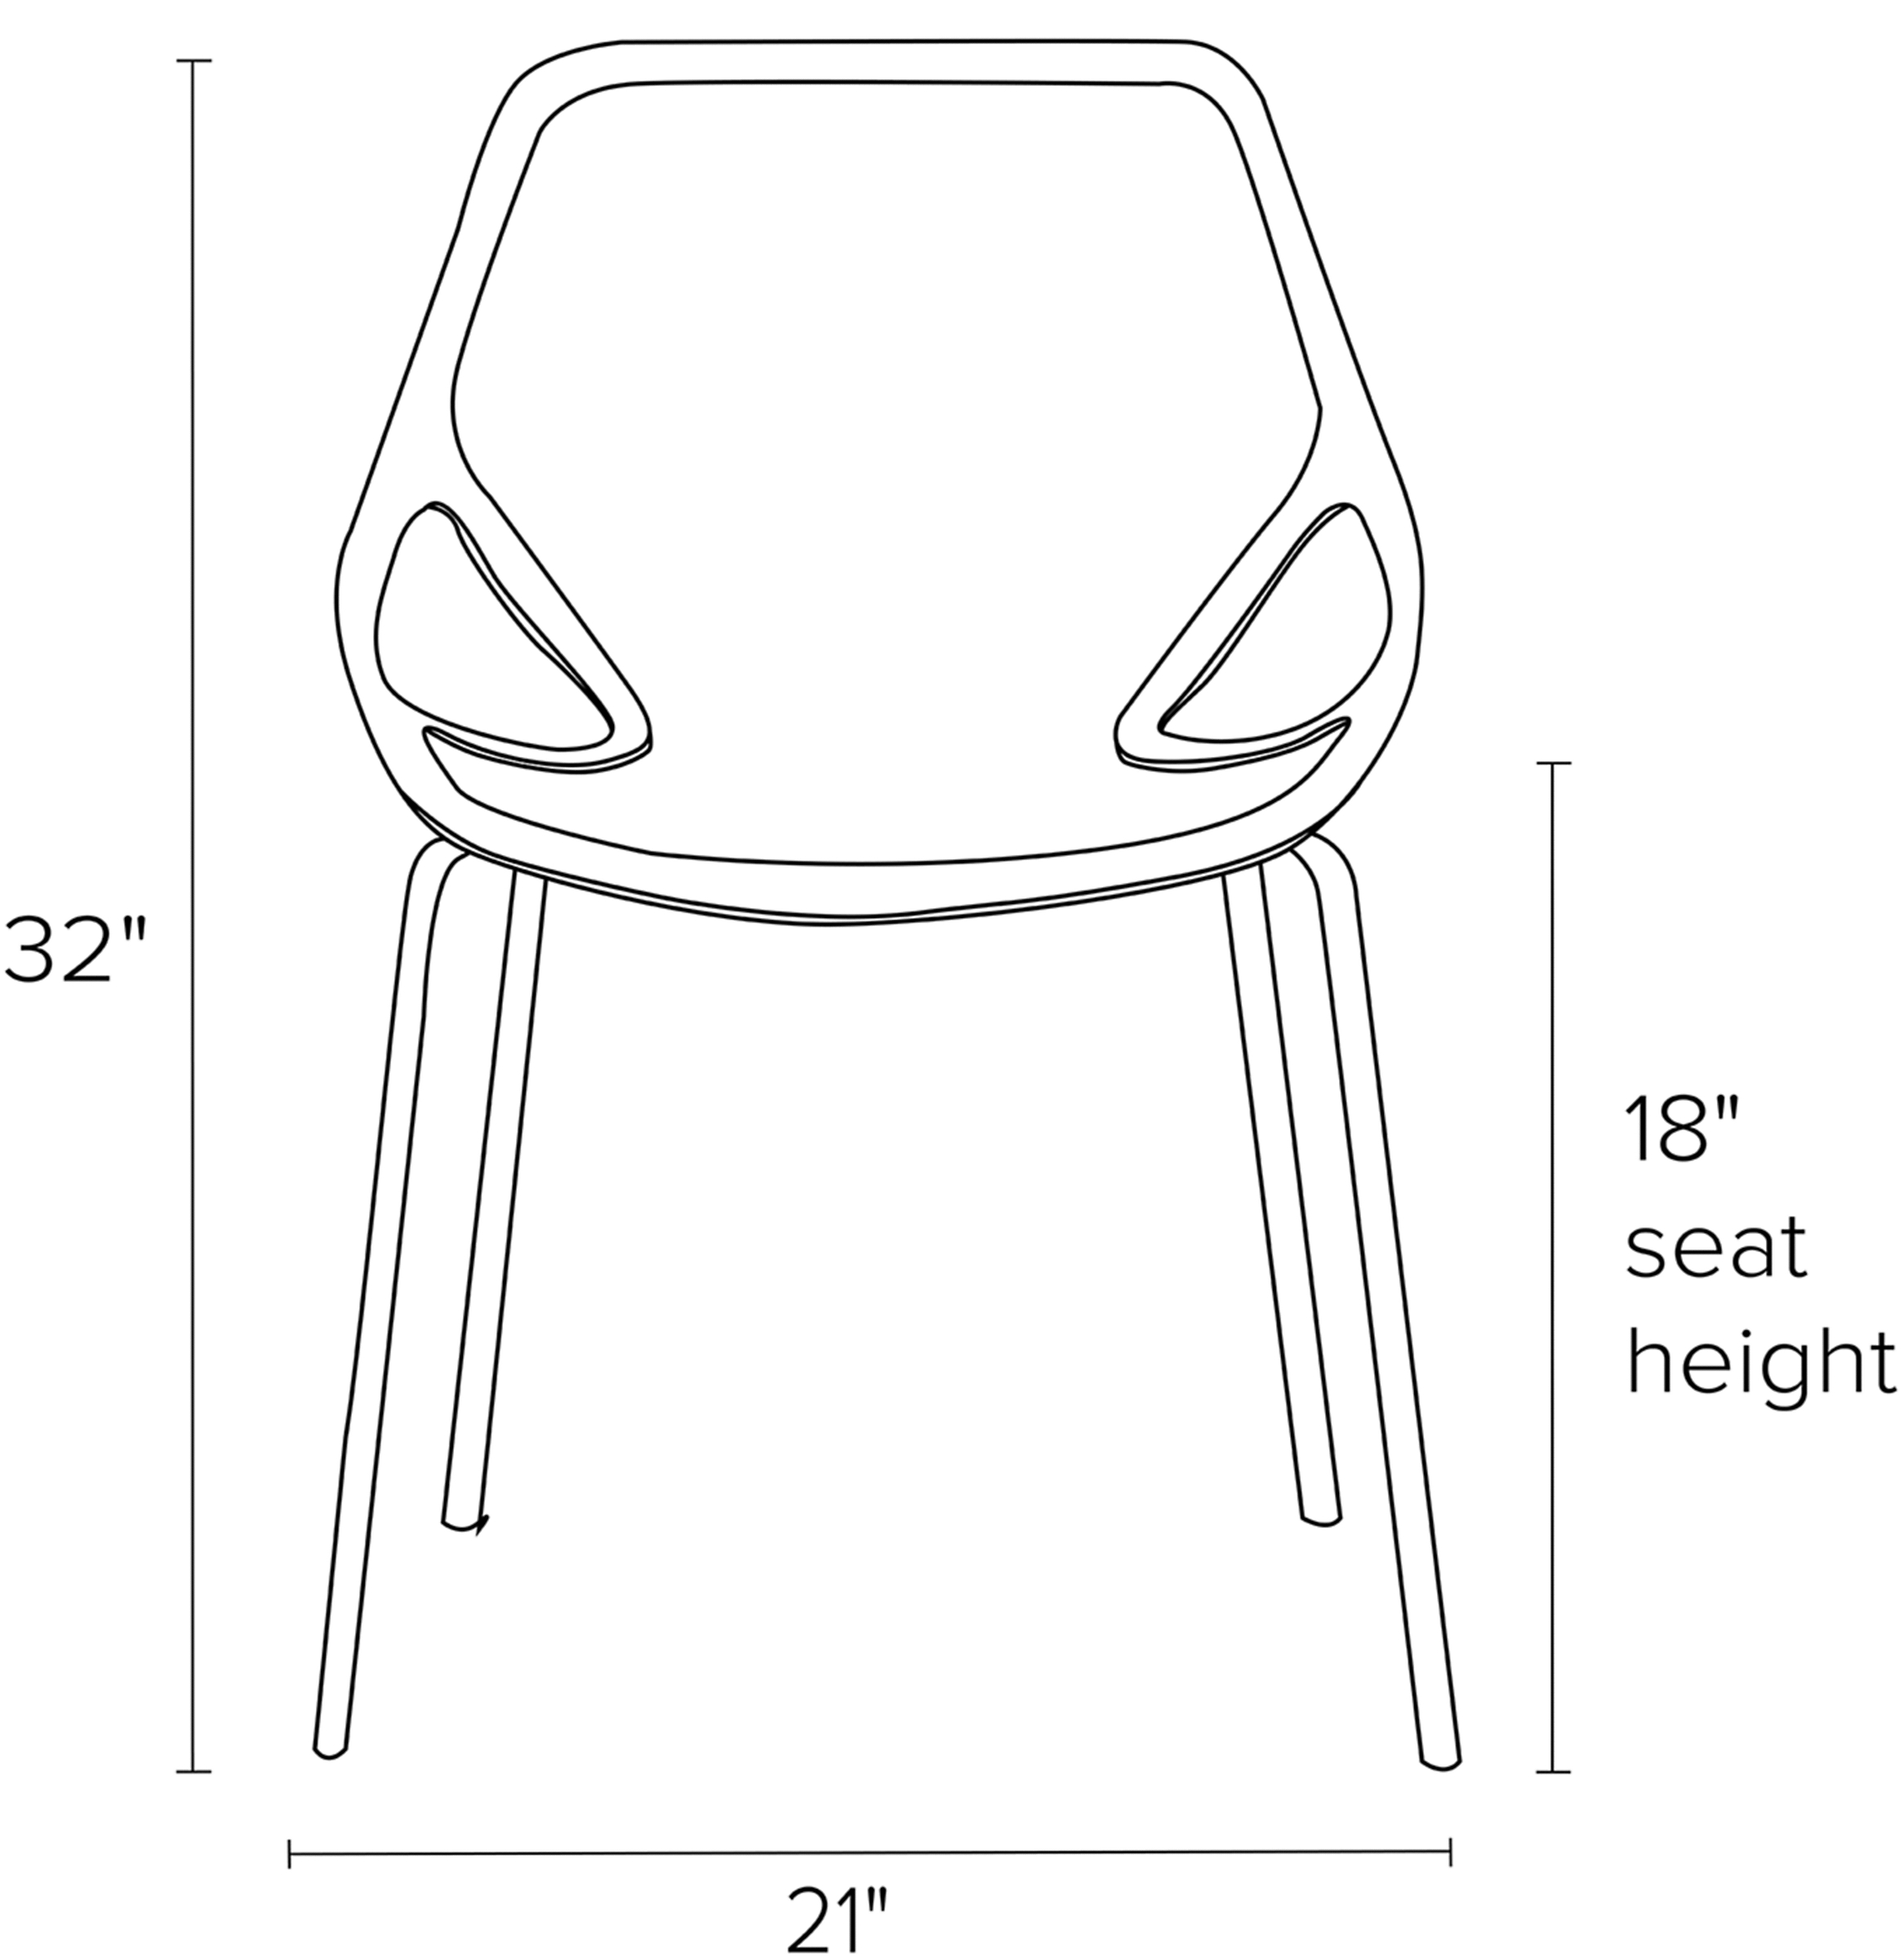 Front view dimension illustration of Caprice side chair.